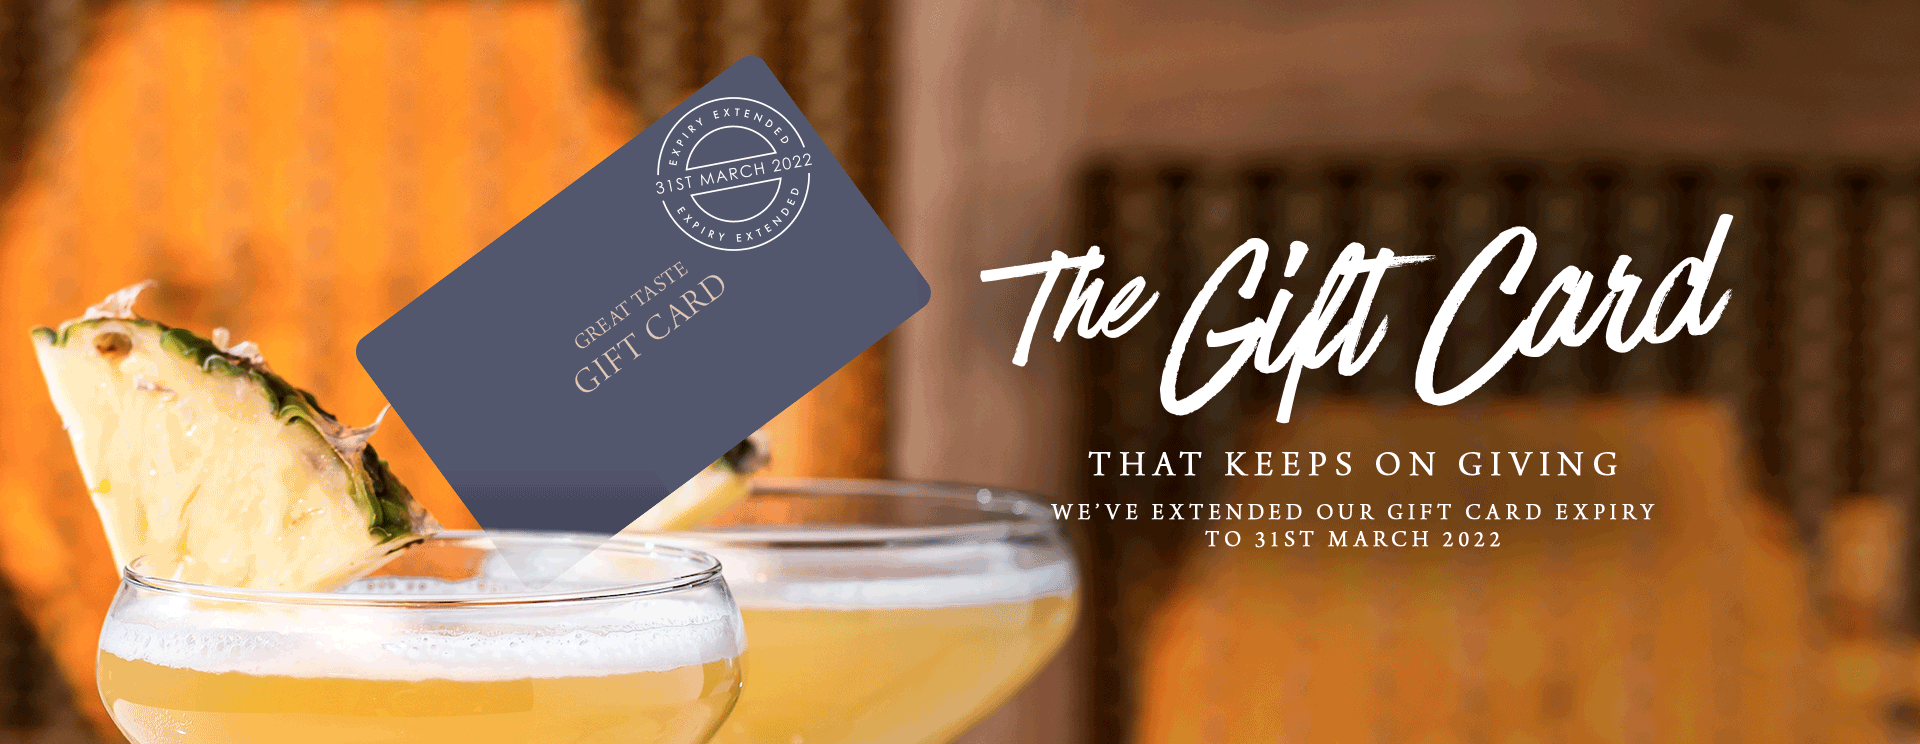 Give the gift of a gift card at The Bell Inn